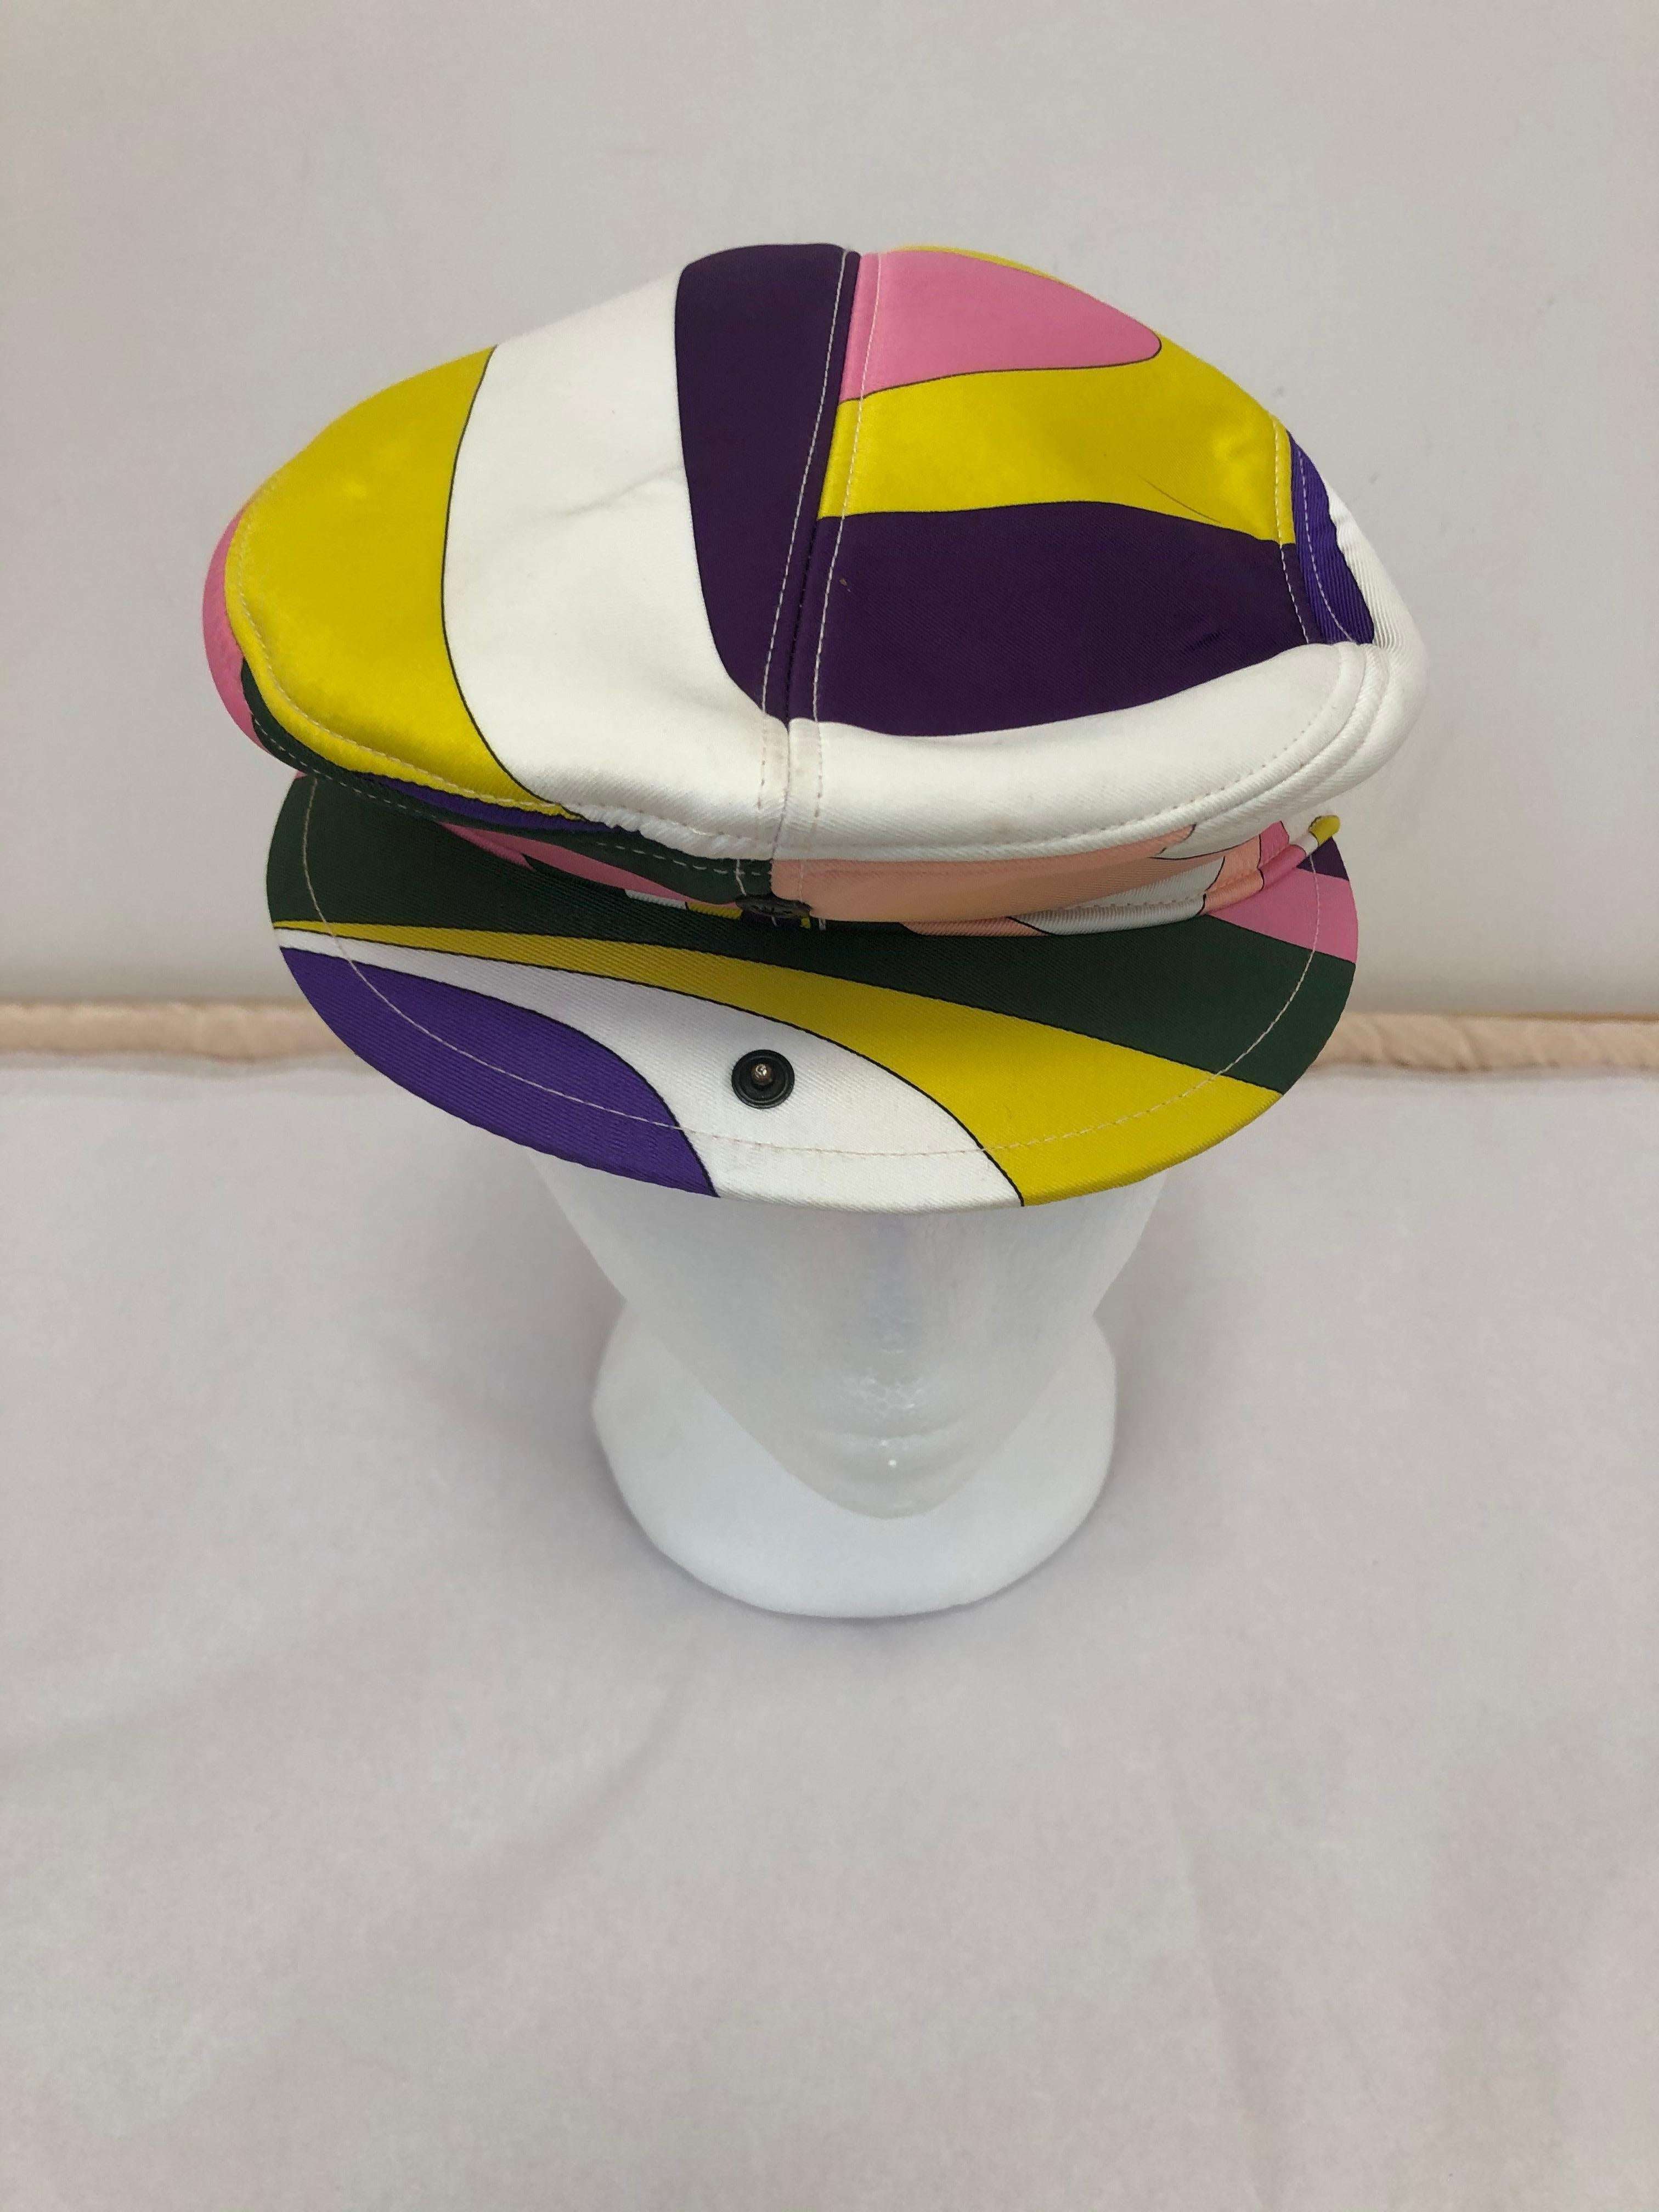 Newsboy cap with a difference as there is a snap in front which allows you to extend the hat. It is an iconic Pucci print and very versitile.